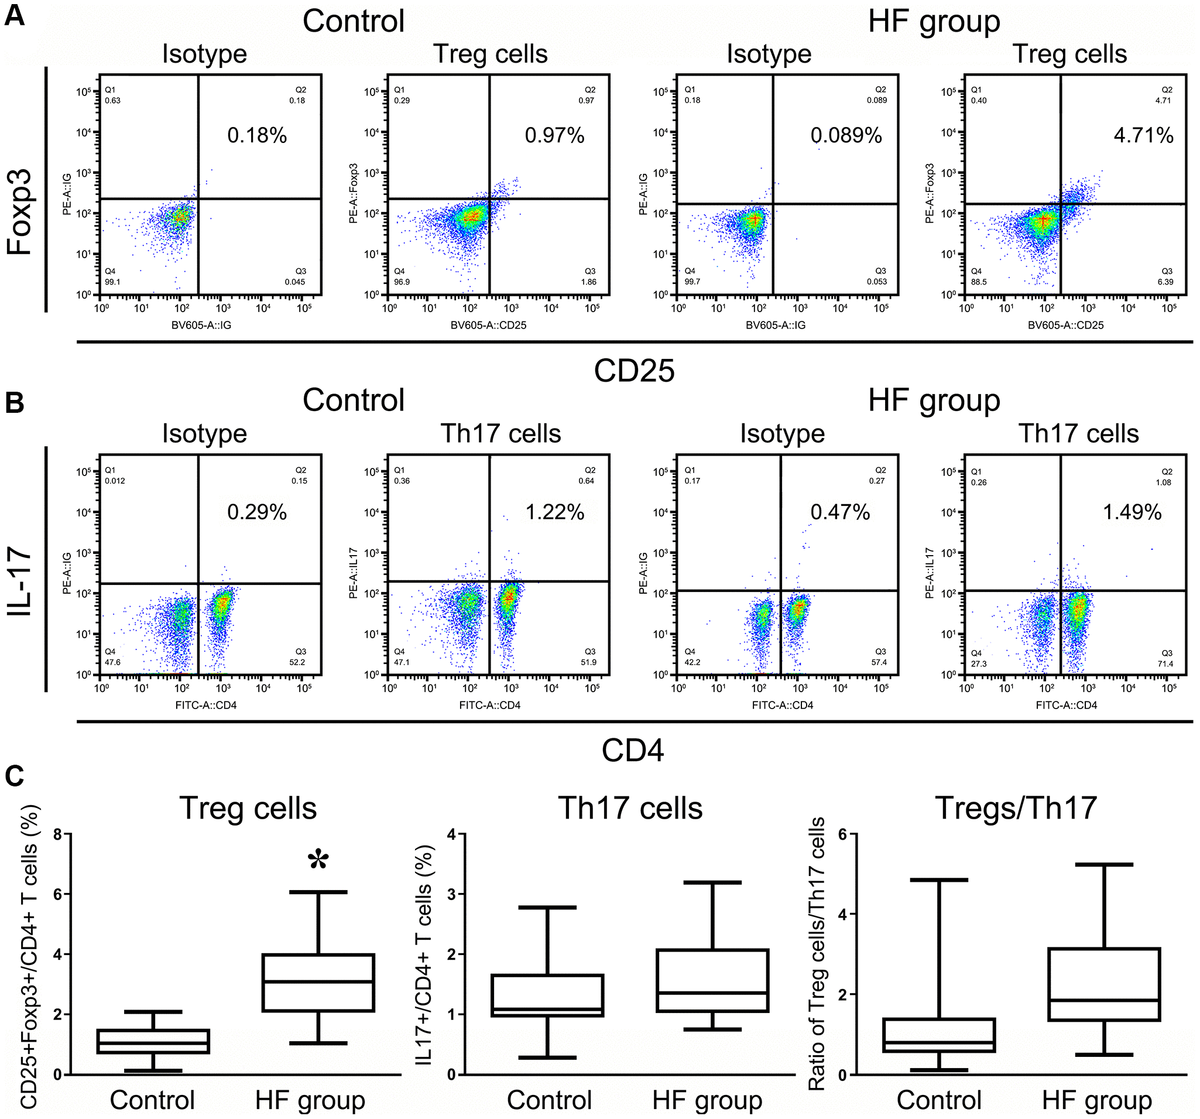 Flow cytometry analysis of CD4+CD25+Foxp3+ Treg cells and CD4+IL17+ T cells in HF patients and healthy controls. All of the values were gated on CD3+CD4+ T cells. The values shown in the each upper right quadrant represent the ratio of Treg cells (A) or Th17 cells (B) for the corresponding CD4+ cells. (C) The statistical histogram shows the changes in Tregs and Th17+ cells and the ratio of Treg/Th17 cells in HF patients and healthy controls.